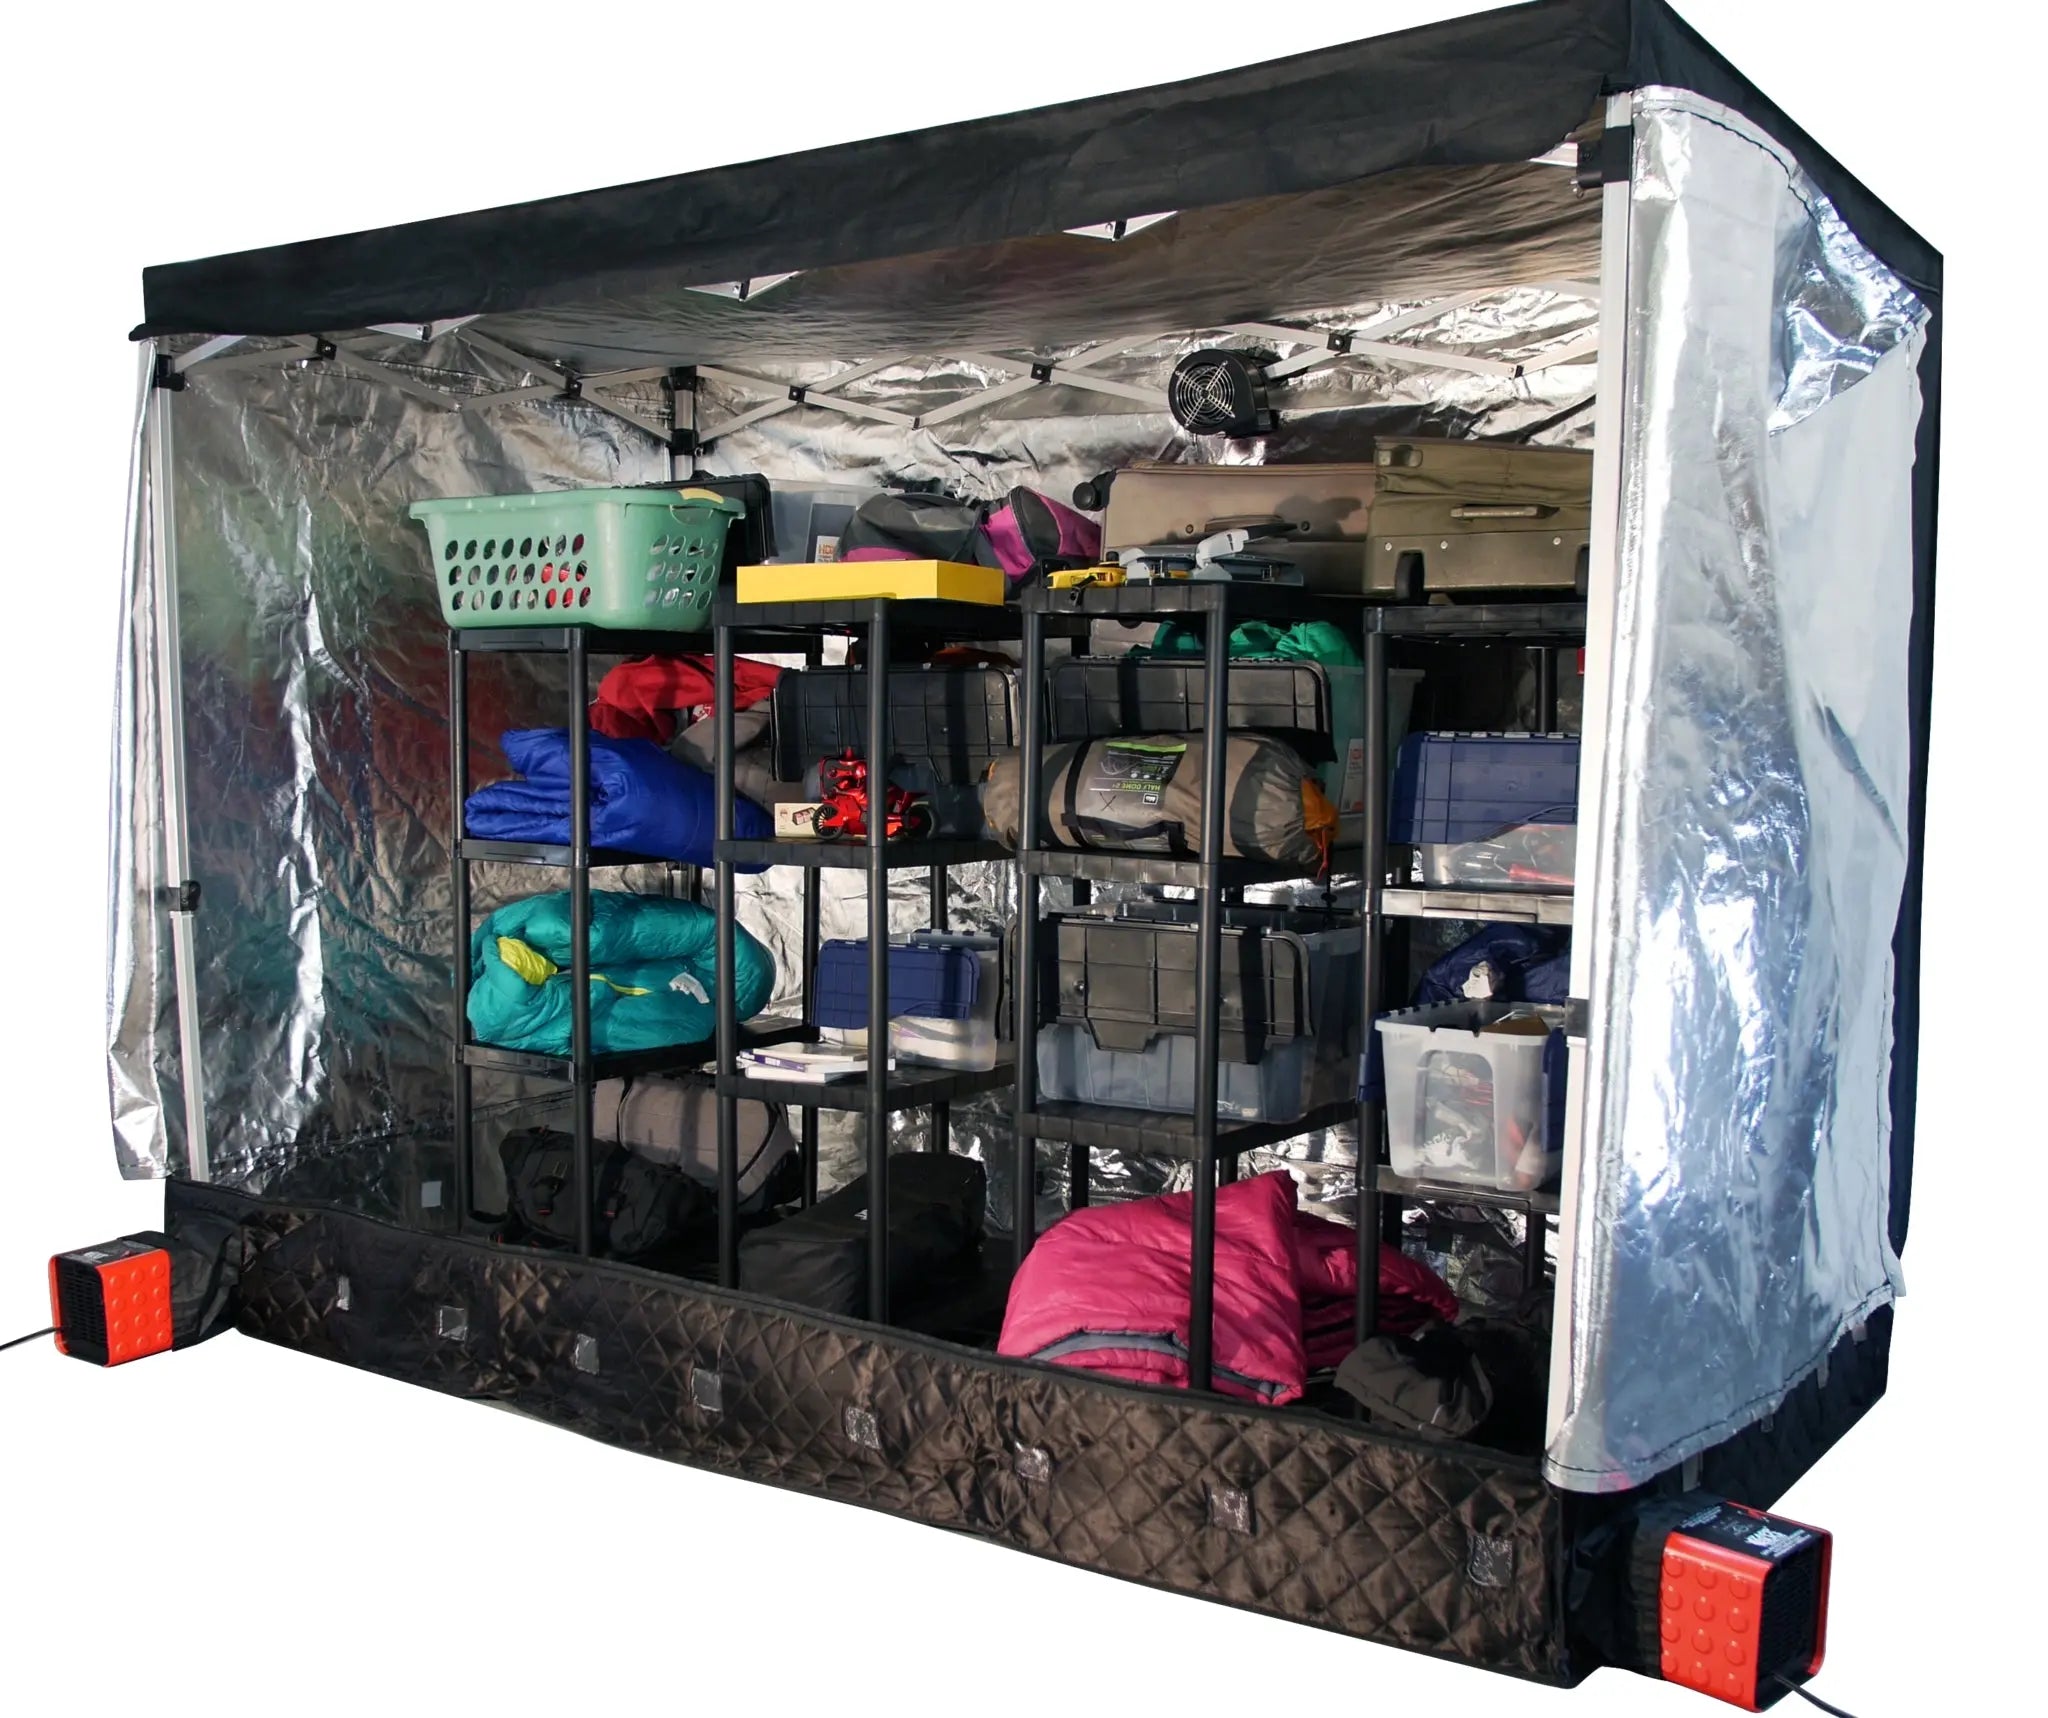 ZappBug Room with self standing plastic shelving units placed inside and loaded with random household items